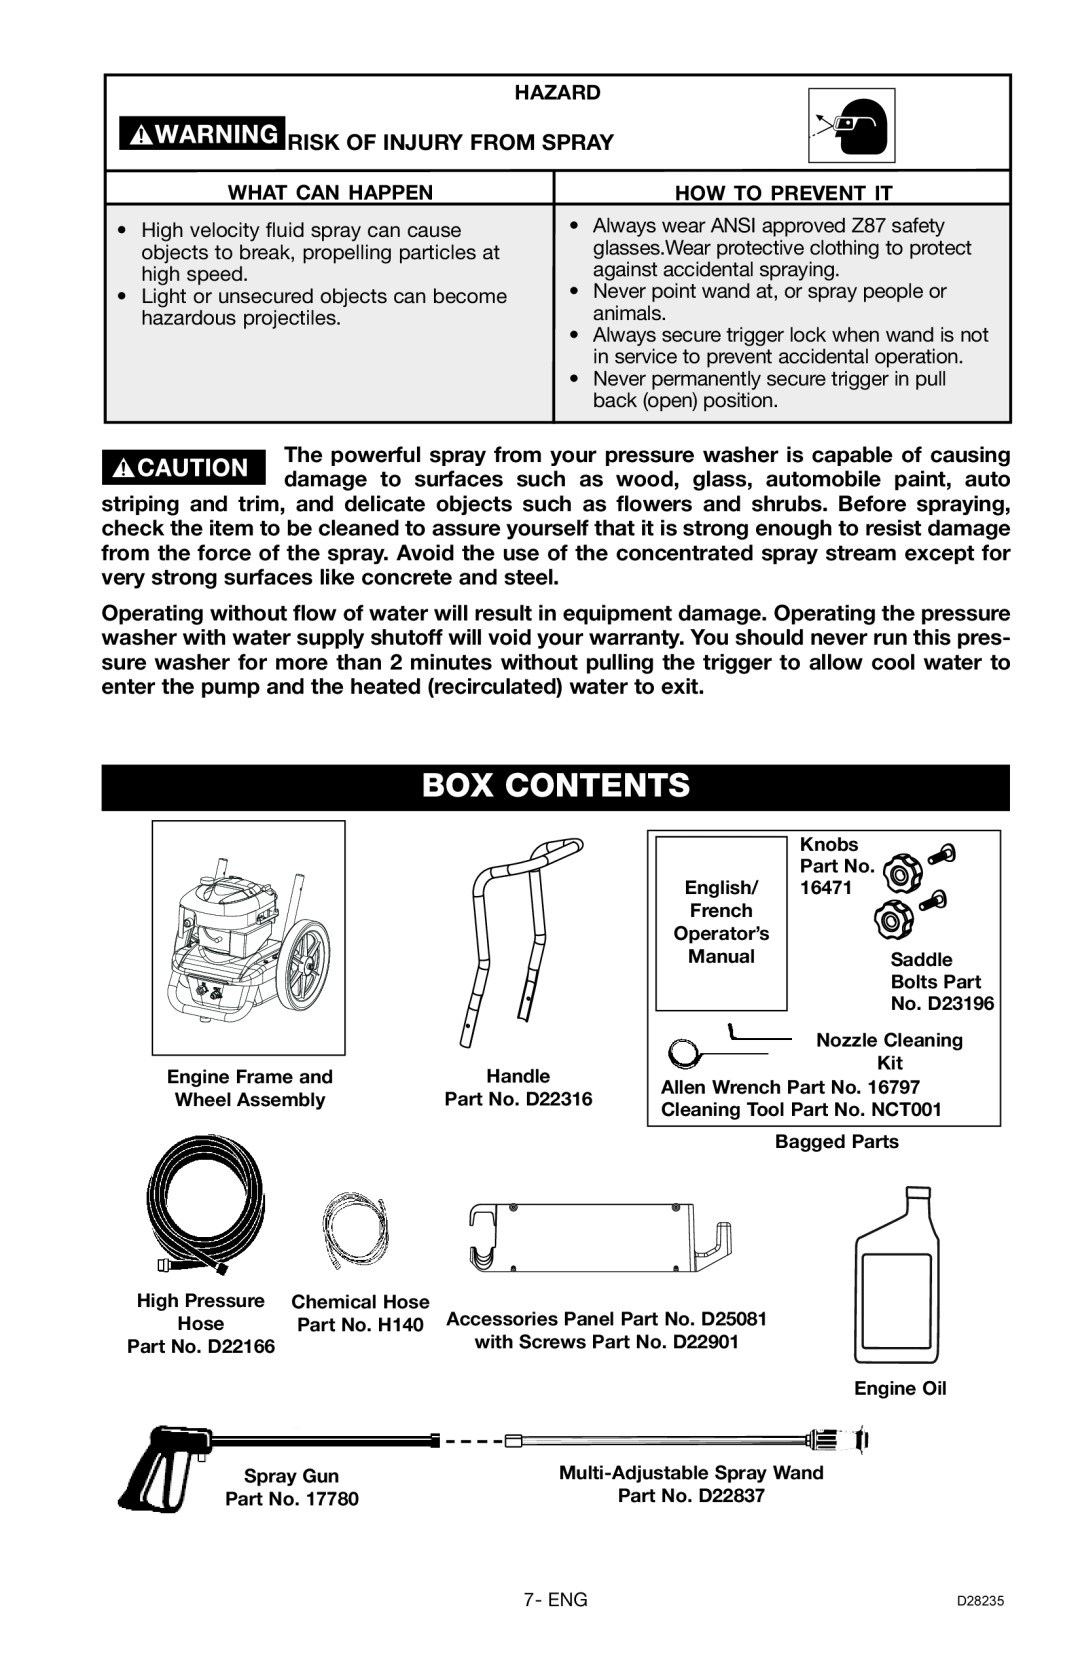 Craftsman 919.672241, D28235 owner manual Box Contents, Risk Of Injury From Spray 